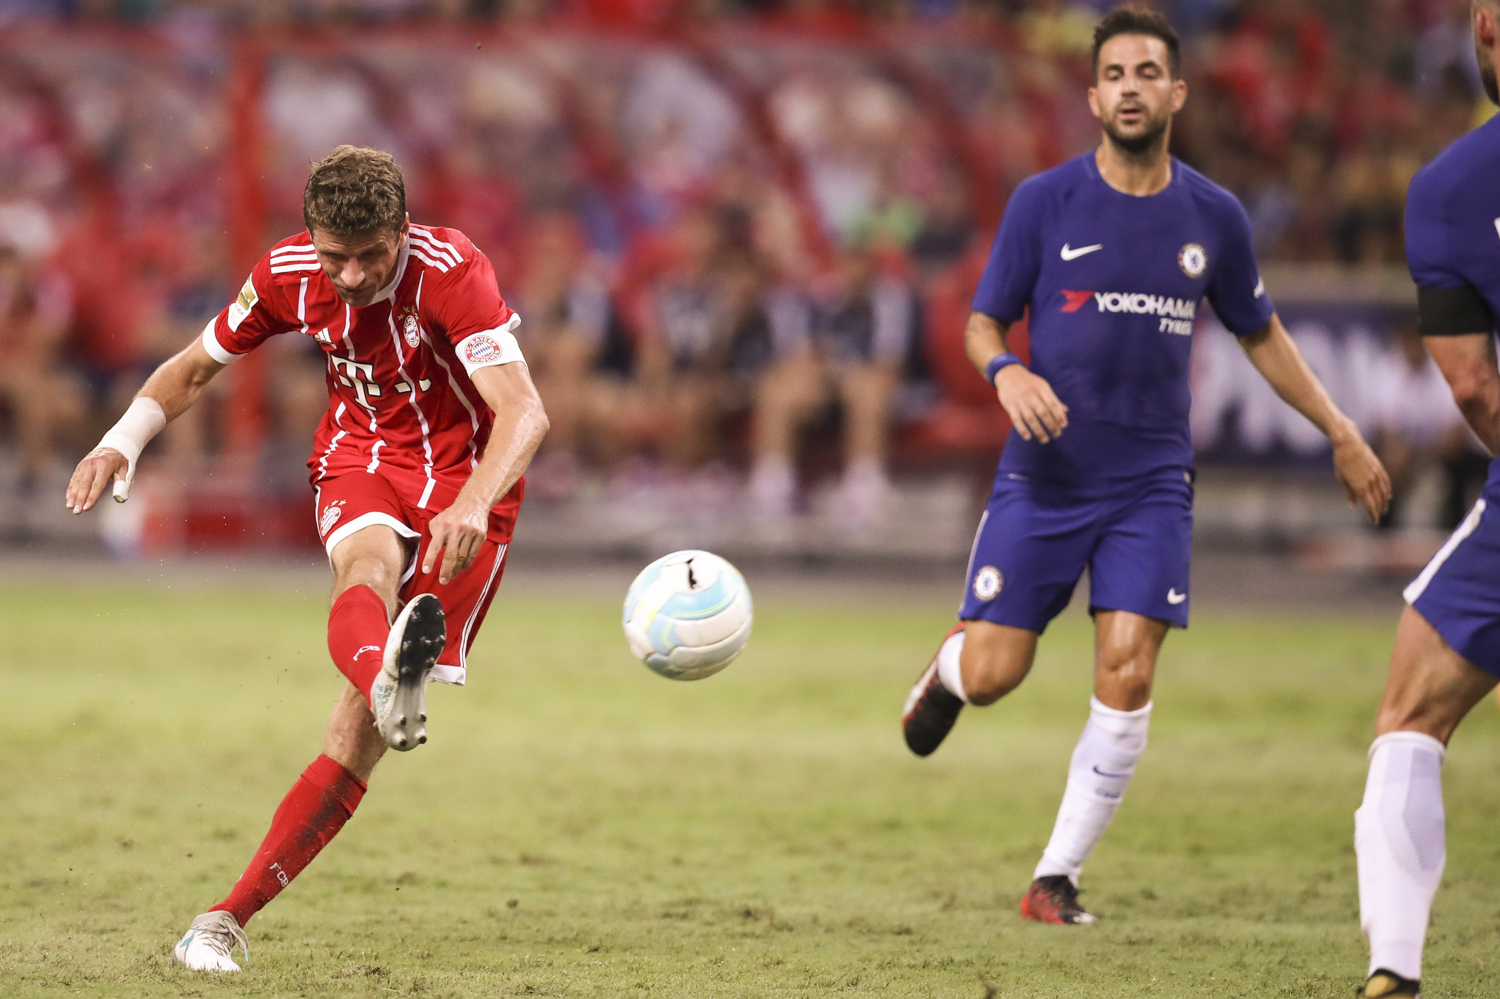  Soccer Football - Chelsea vs Bayern Munich - International Champions Cup - Singapore - July 25, 2017 Bayern Munich's Thomas Muller scores the third goal for his side REUTERS/Yong Teck Lim 